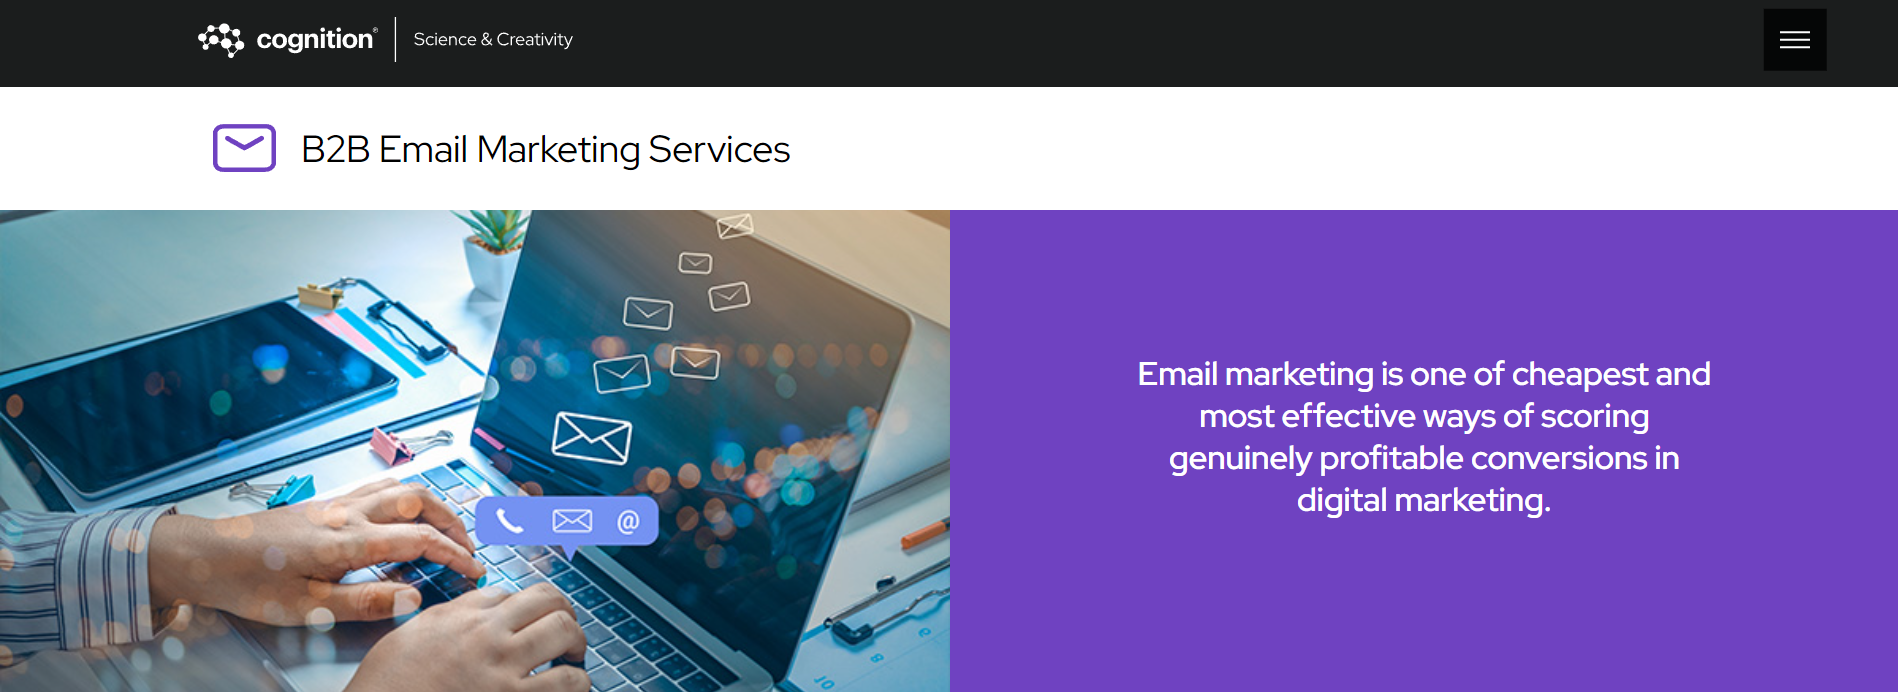 Cognition email marketing services